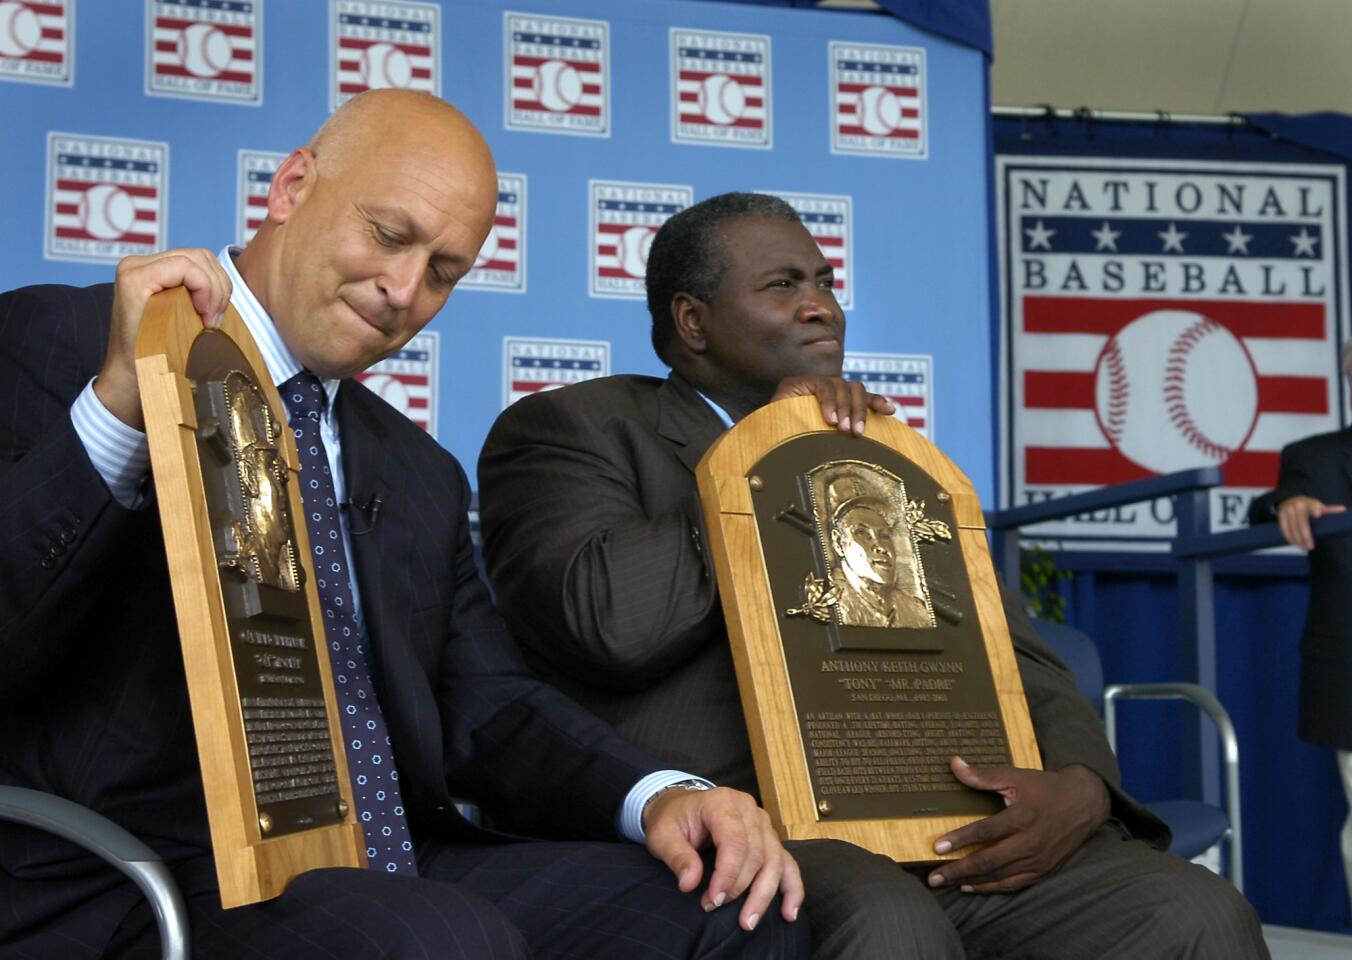 Cal Ripken Jr. holds his Baseball Hall of Fame plaque along with former San Diego Padre Tony Gwynn after their induction.